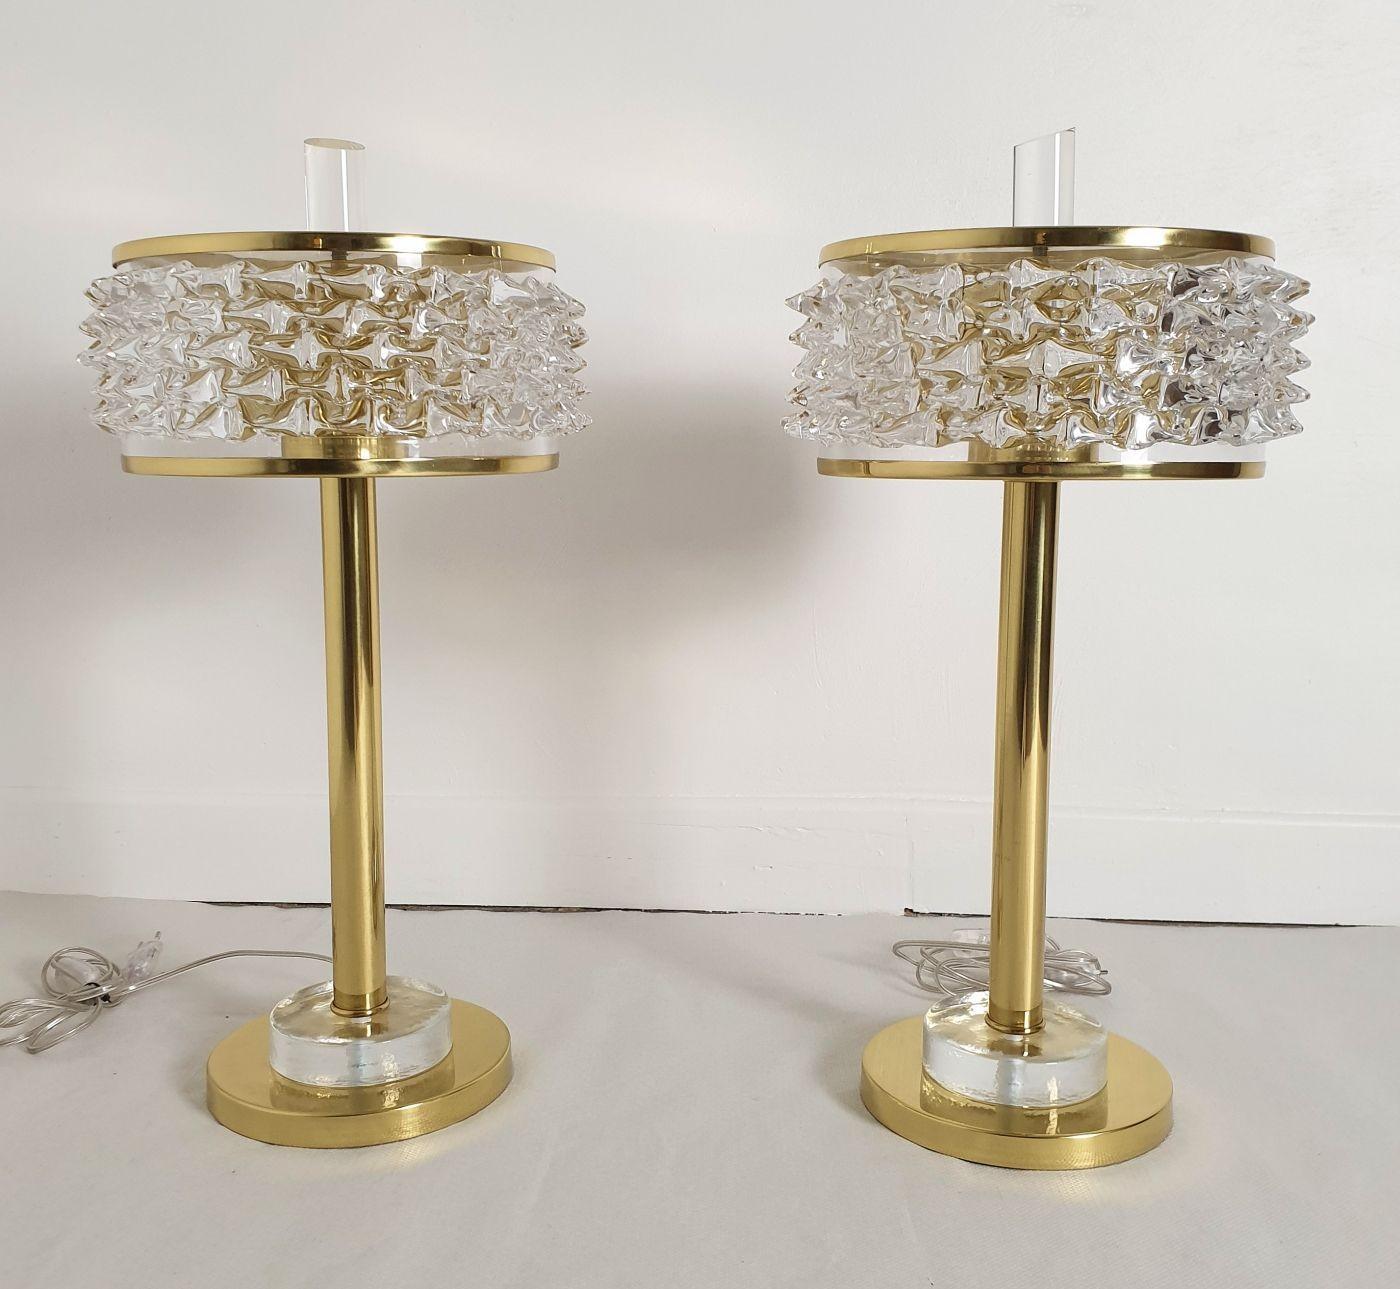 Pair of Mid-Century Modern table or desk lamps, Italy 1970s.
The lamps are made of polished brass and translucent very thick handmade Murano glass shades.
The diameter of the base is: 7.87 in.
The diameter of the shade is: 13.38 in.
Each lamp